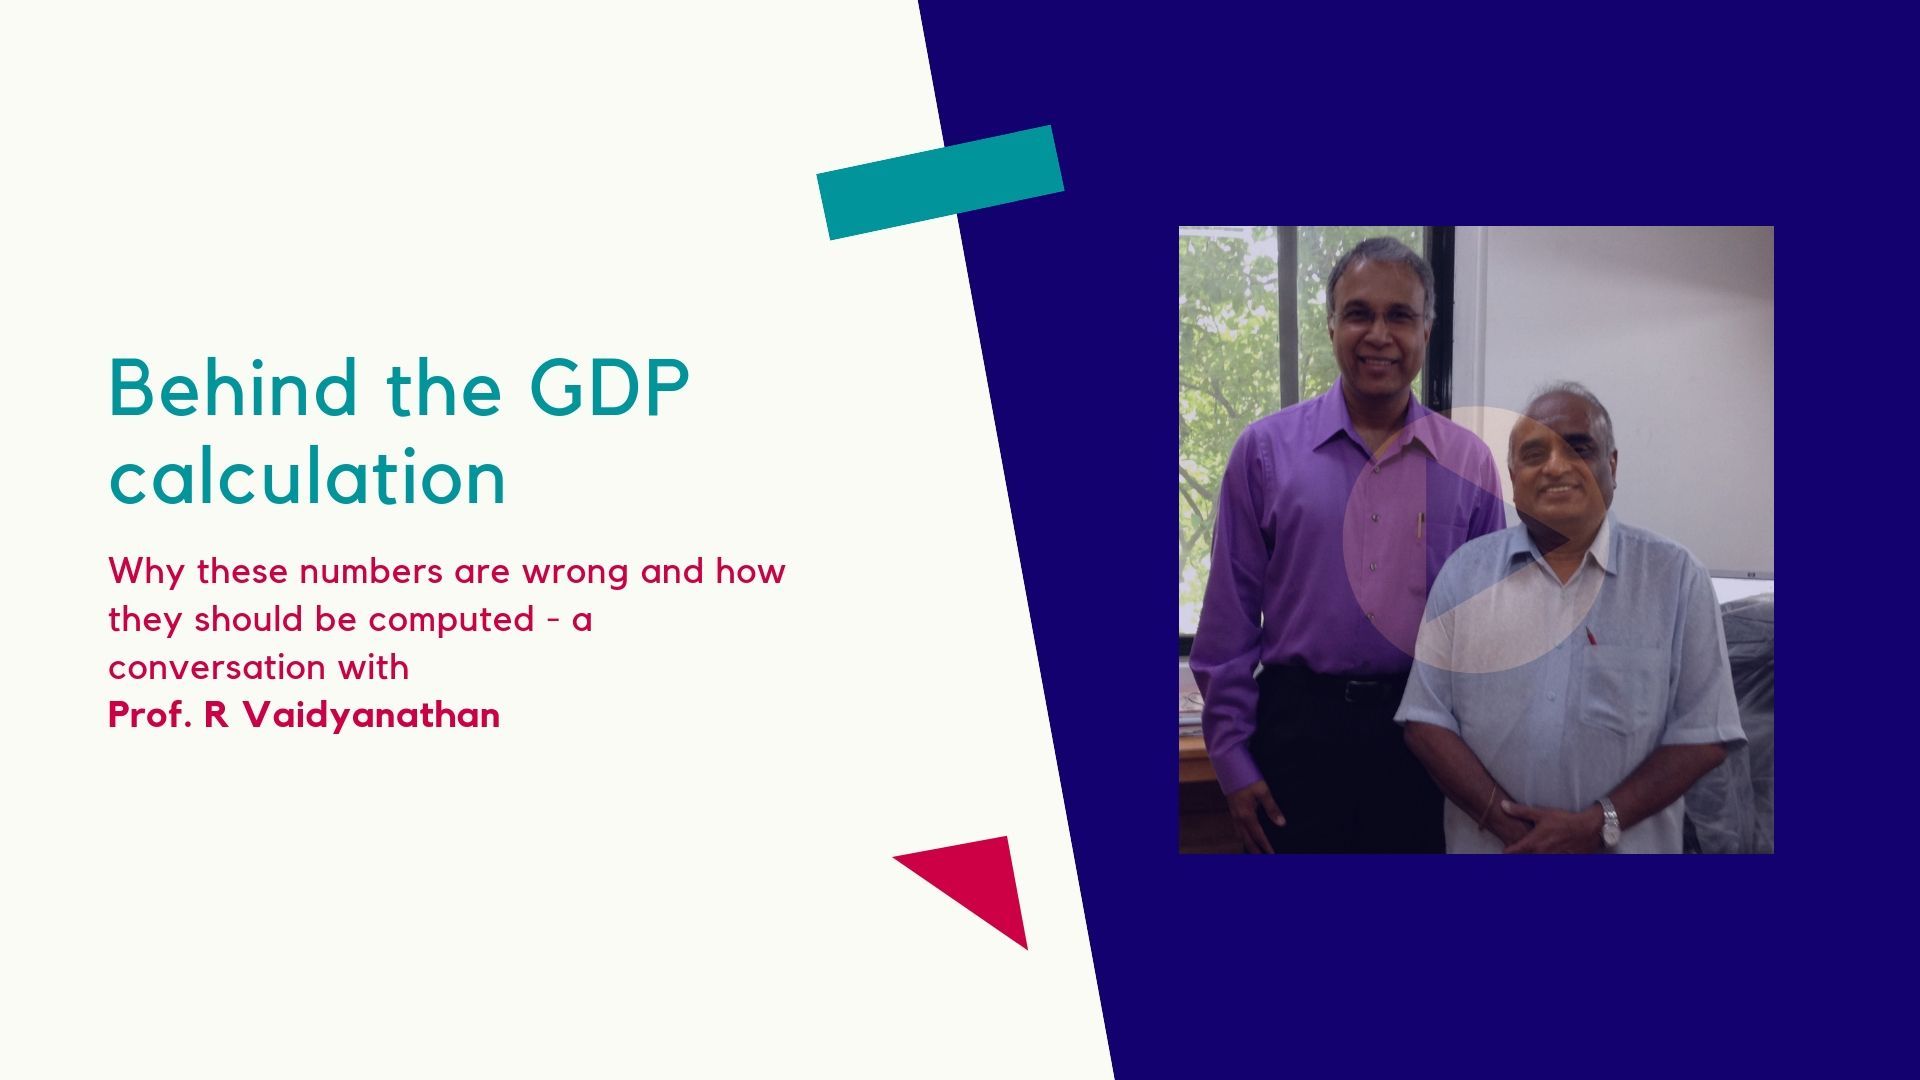 Are those computing India's GDP like Blind men in a room trying to identify an elephant that they have never seen? In how many ways can the GDP be computed? An in-depth discussion with Prof R Vaidyanathan